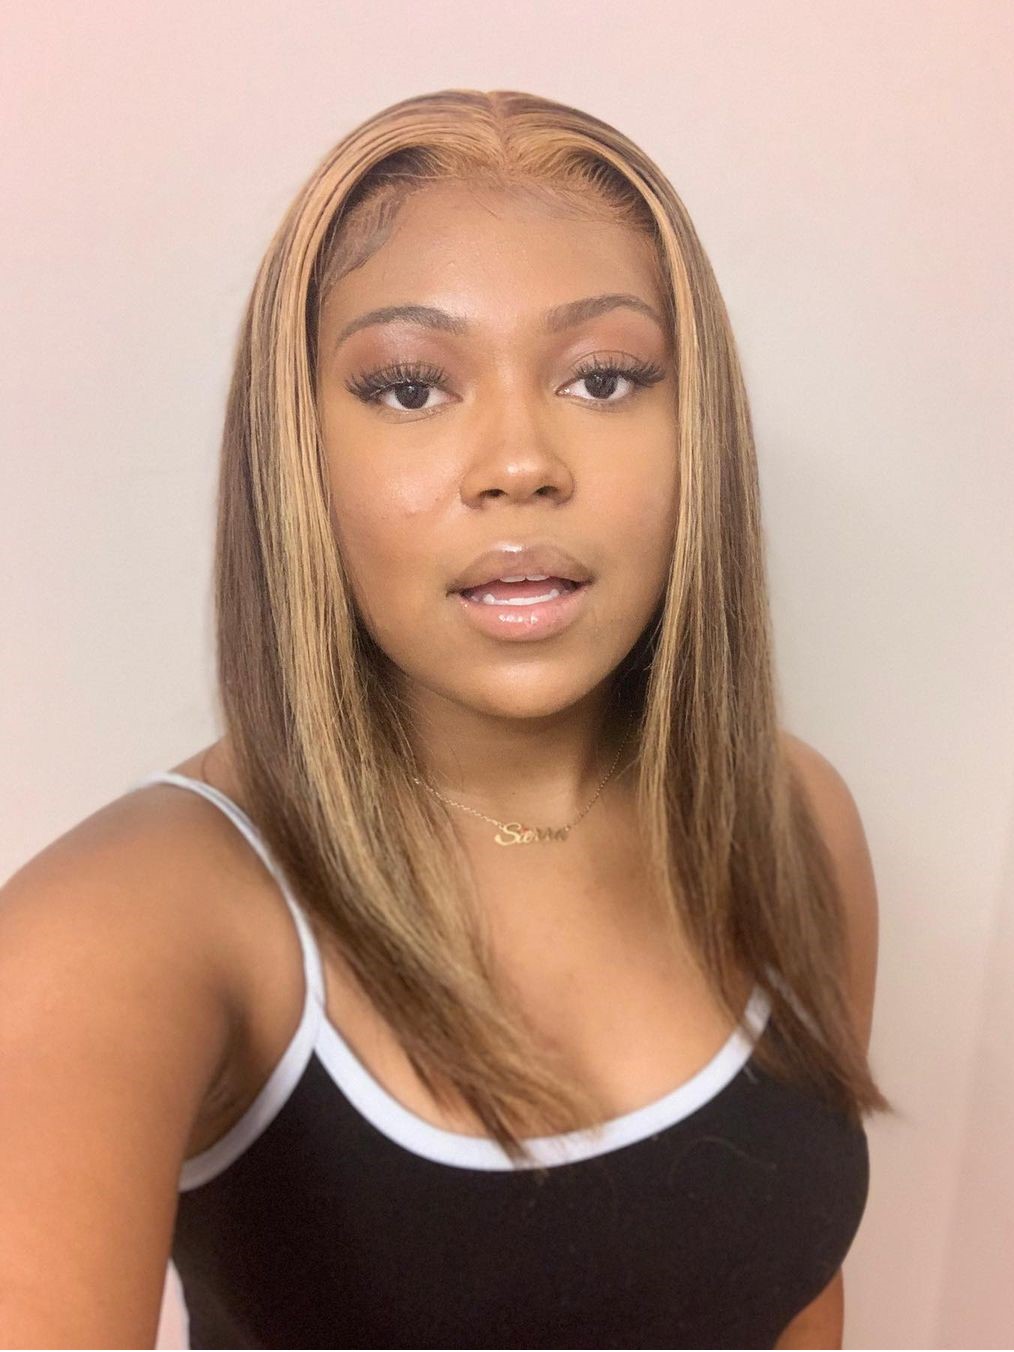 Jenny from the block - Human Hair Lace Front Wig with Brown and Blonde Highlights